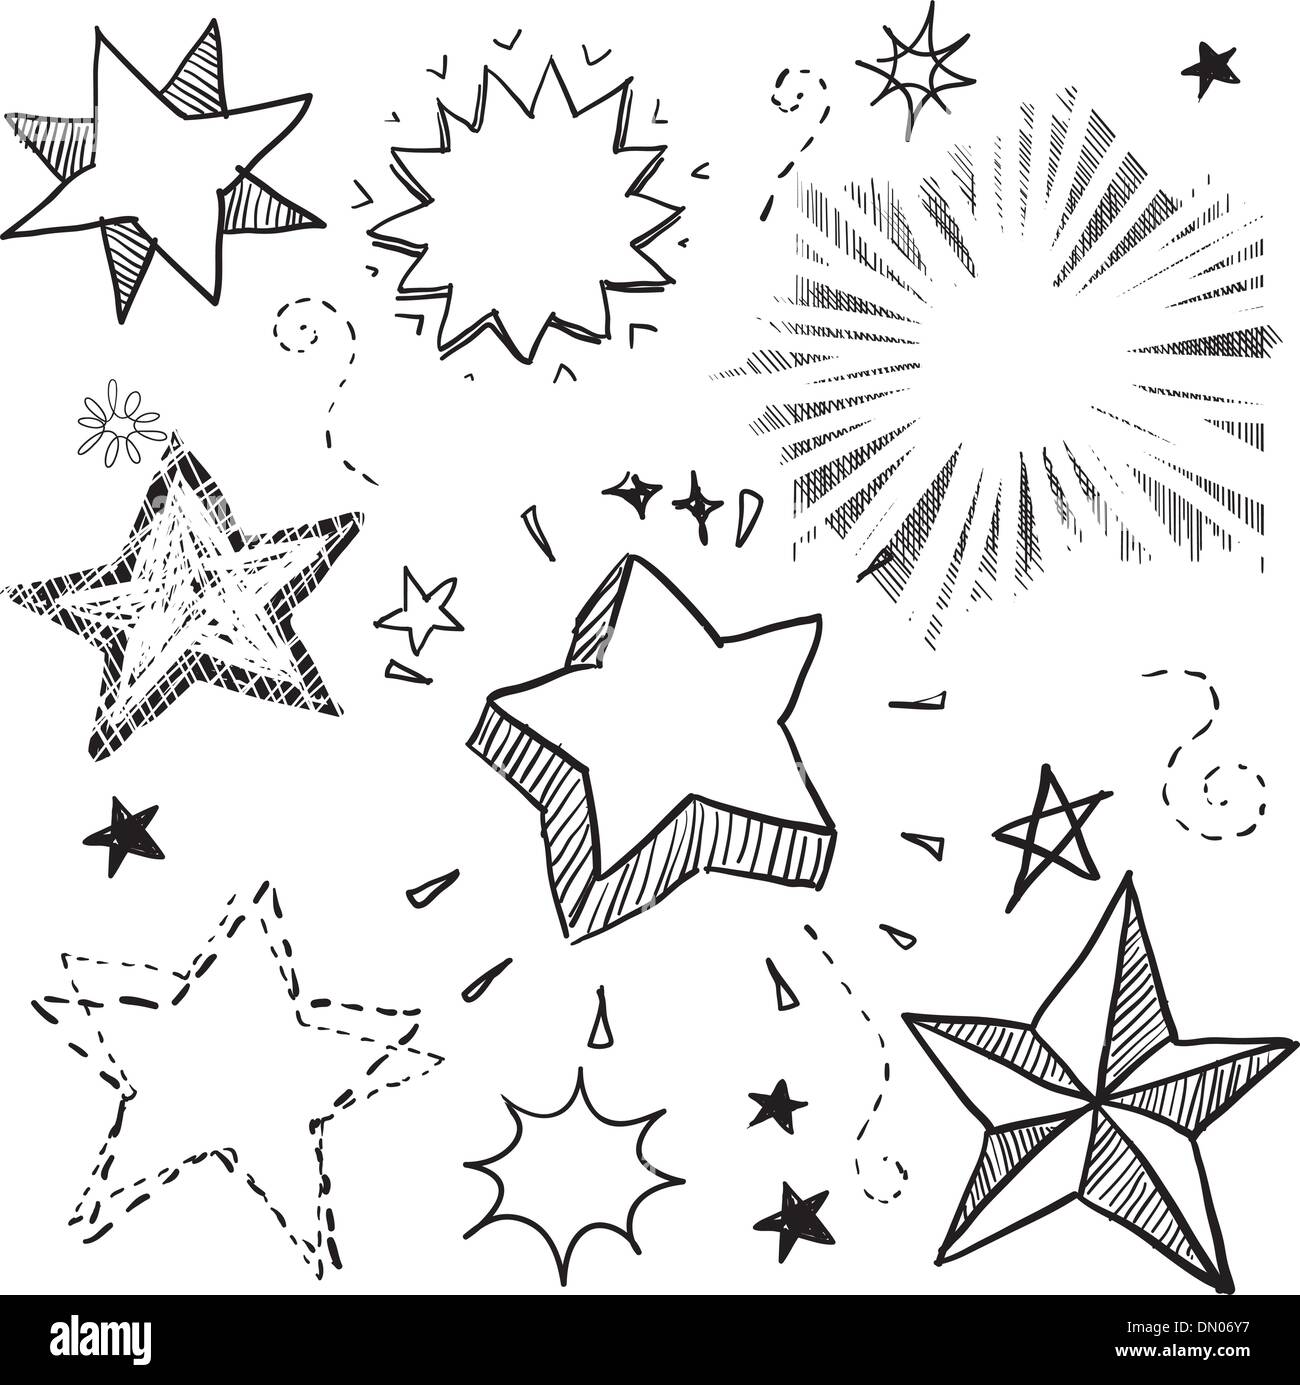 Stars and explosions vector doodle Stock Vector